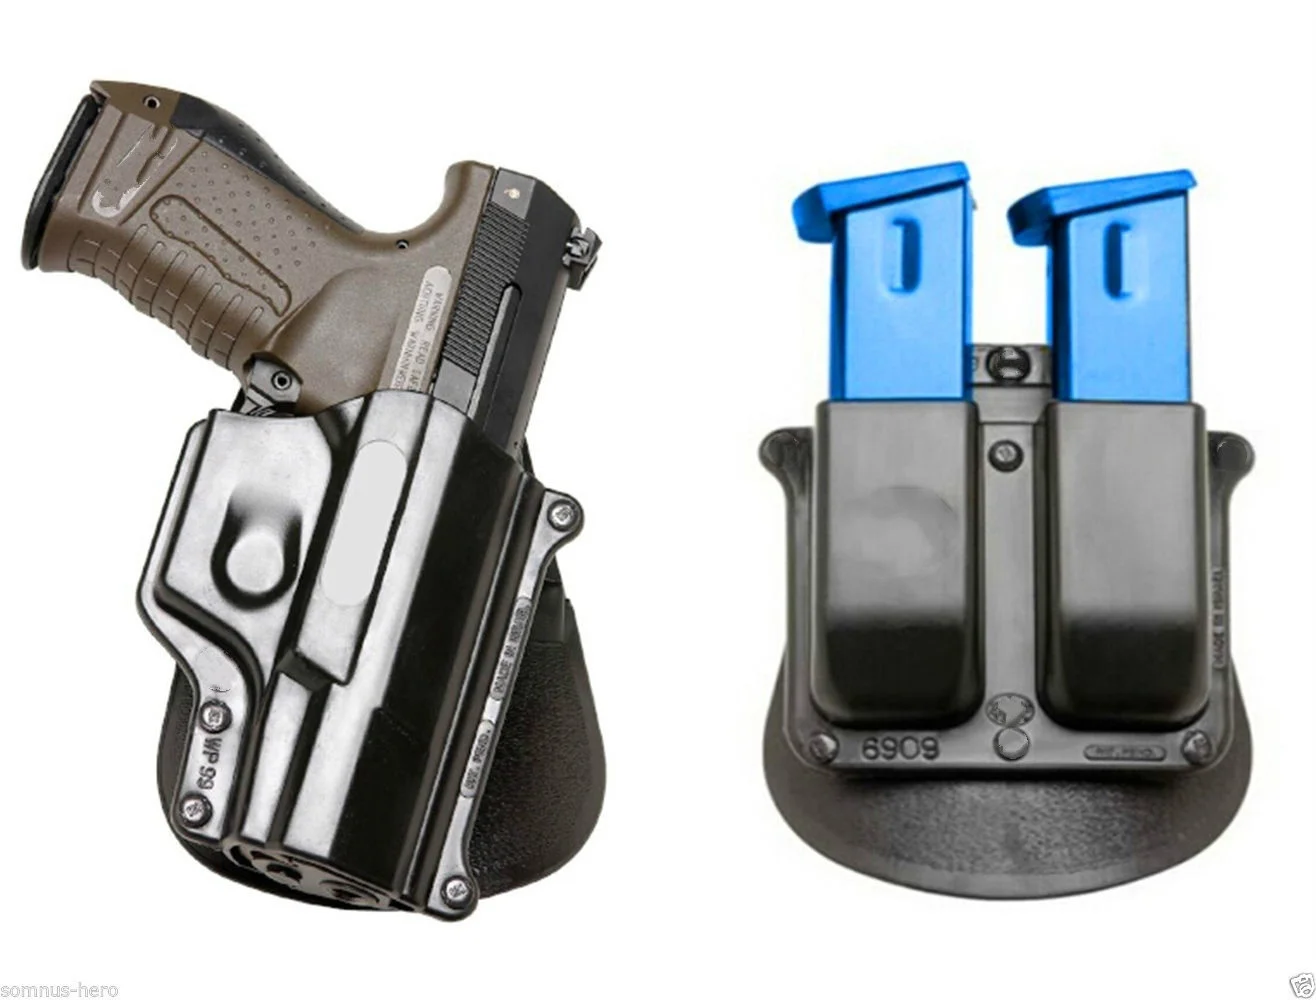 Tactical Hunting Accessories Double Magazine Holster 6909 for WP99 Airsoft CQB